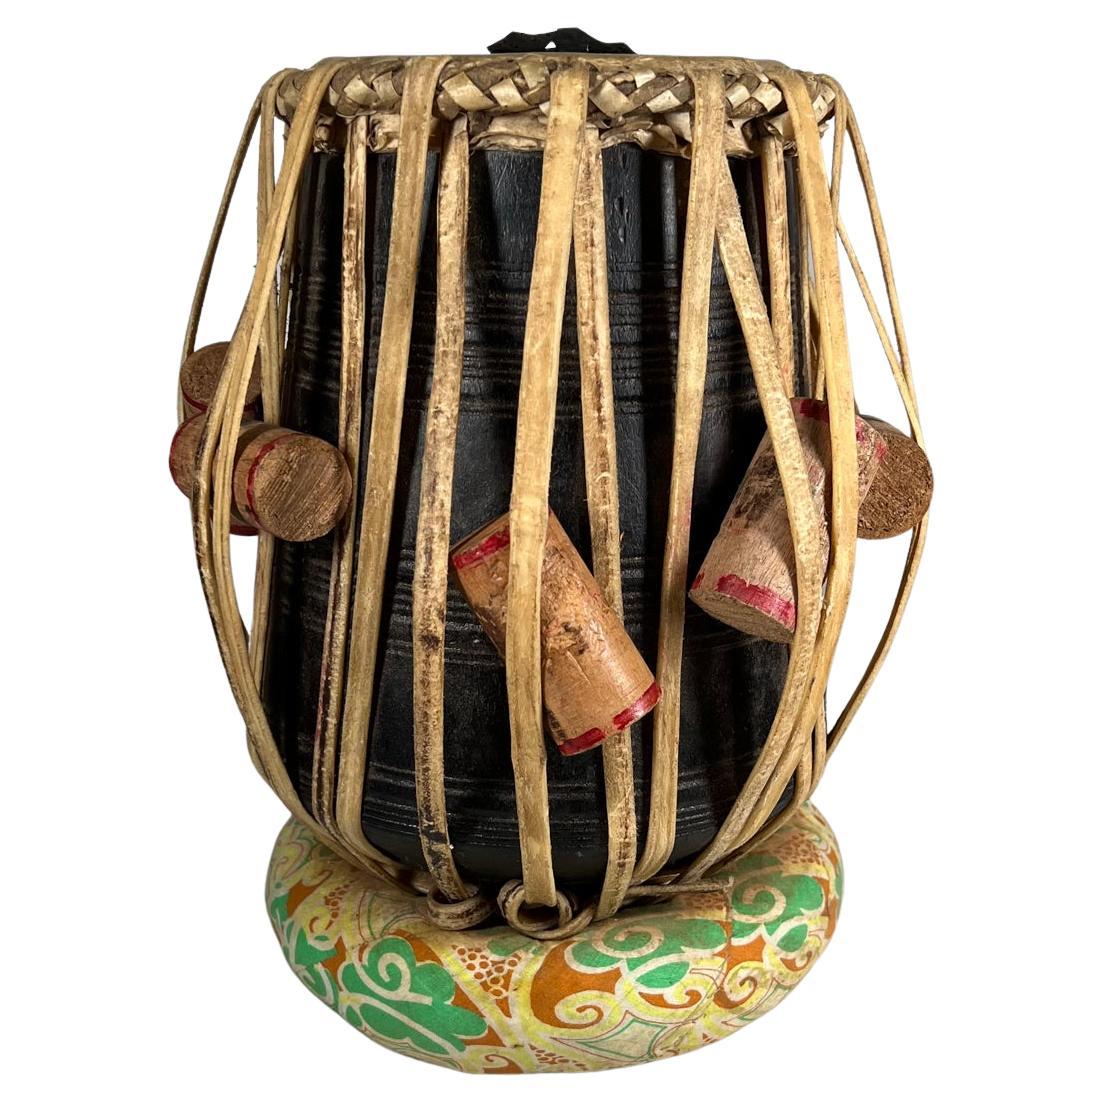 1970s Vintage Musical Tabla Wood Drum from Bombay India